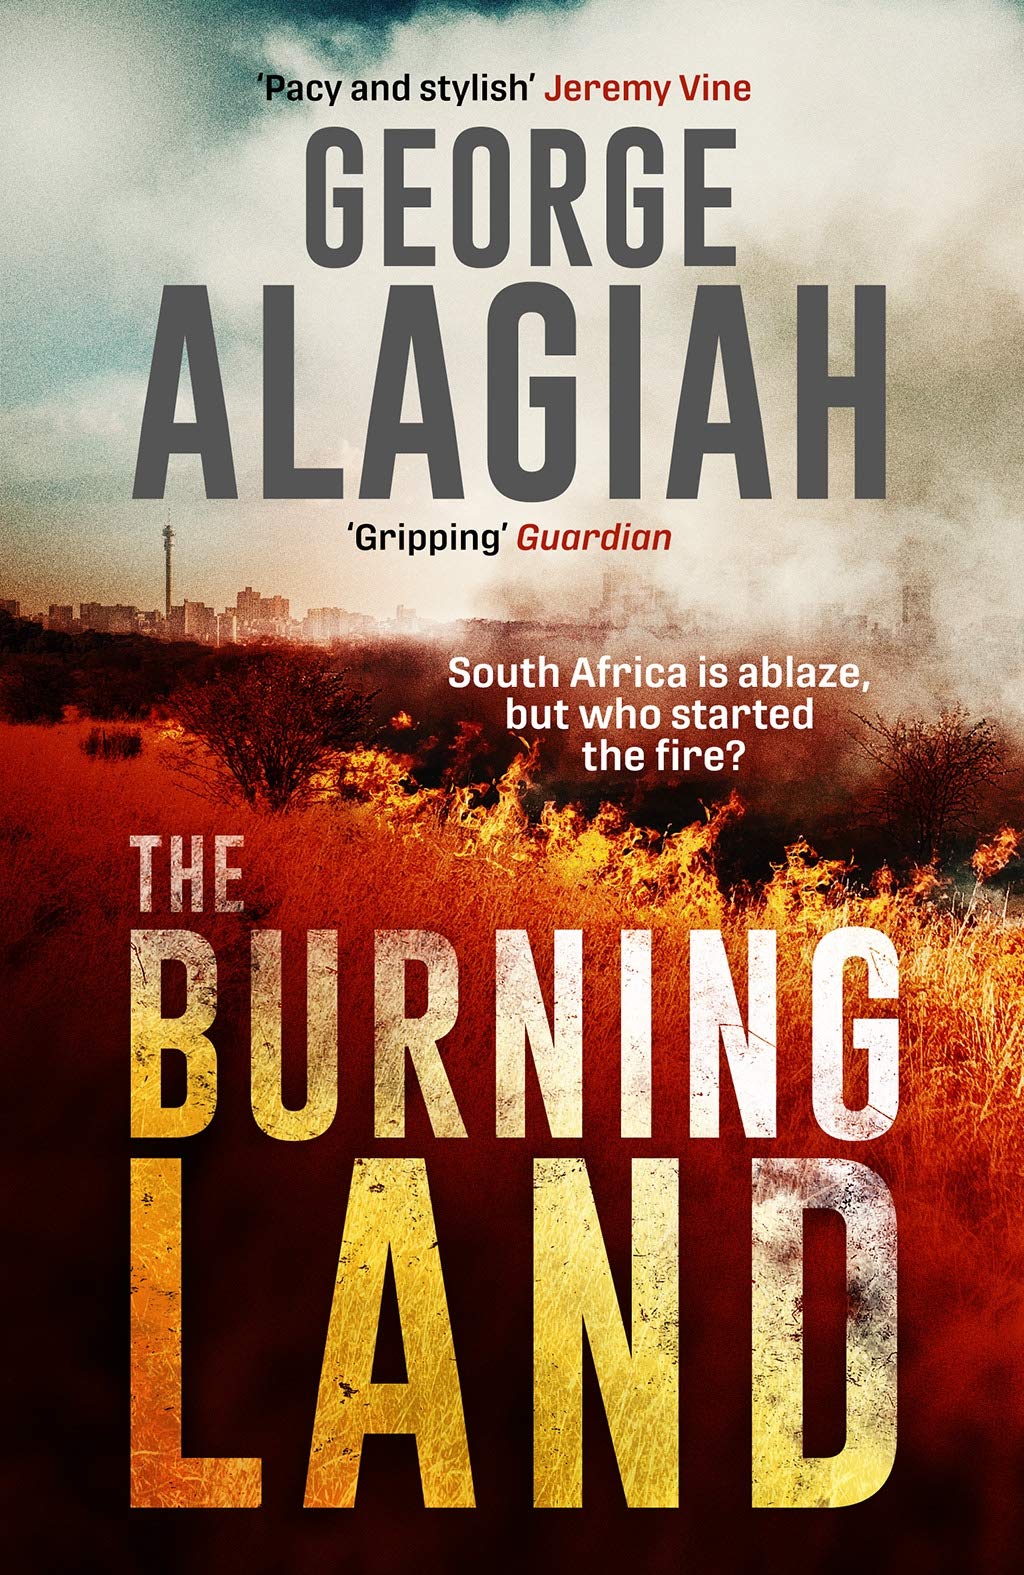 The Burning Land by George Alagiah.